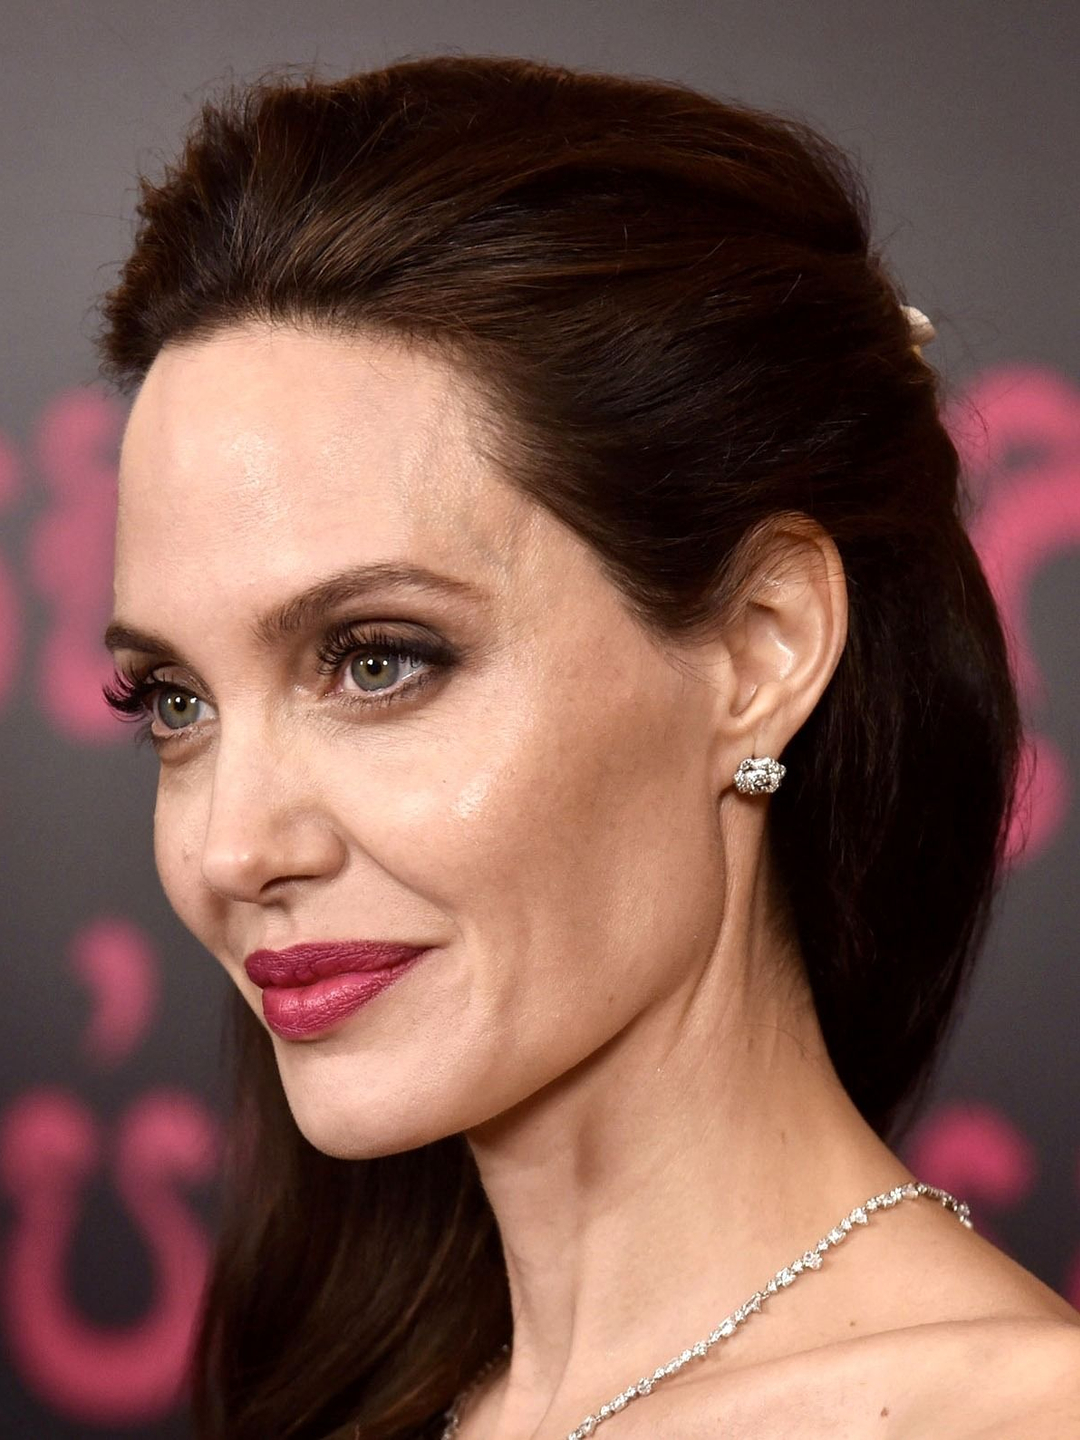 Angelina Jolie who is her father